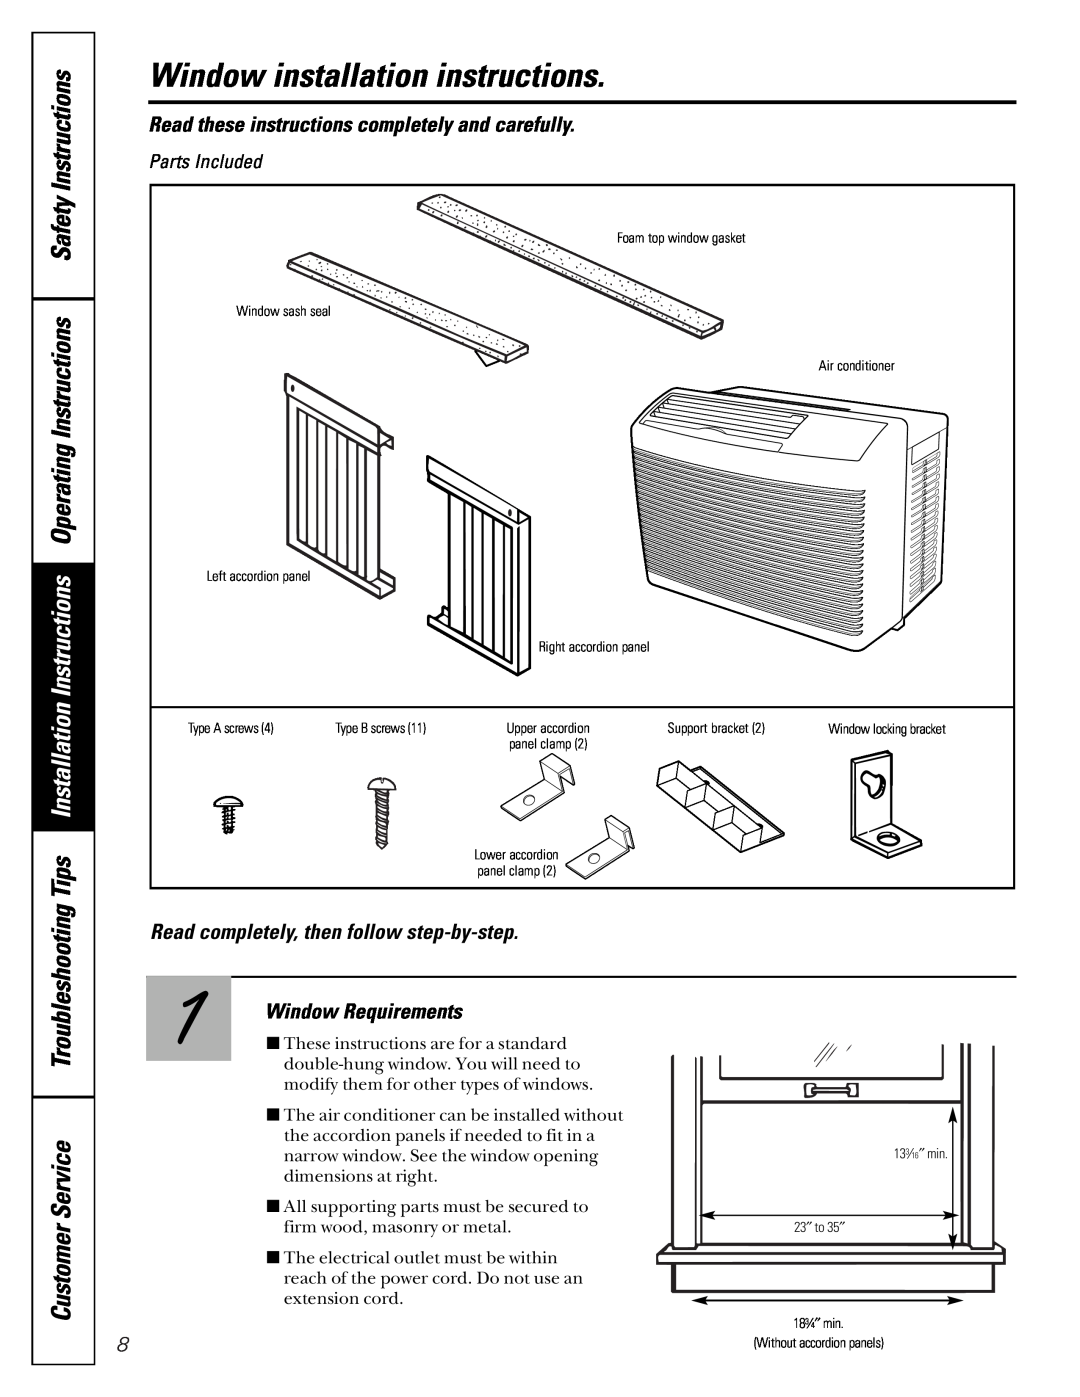 LG Electronics ASC05 Window installation instructions, Read completely, then follow step-by-step, Window Requirements 